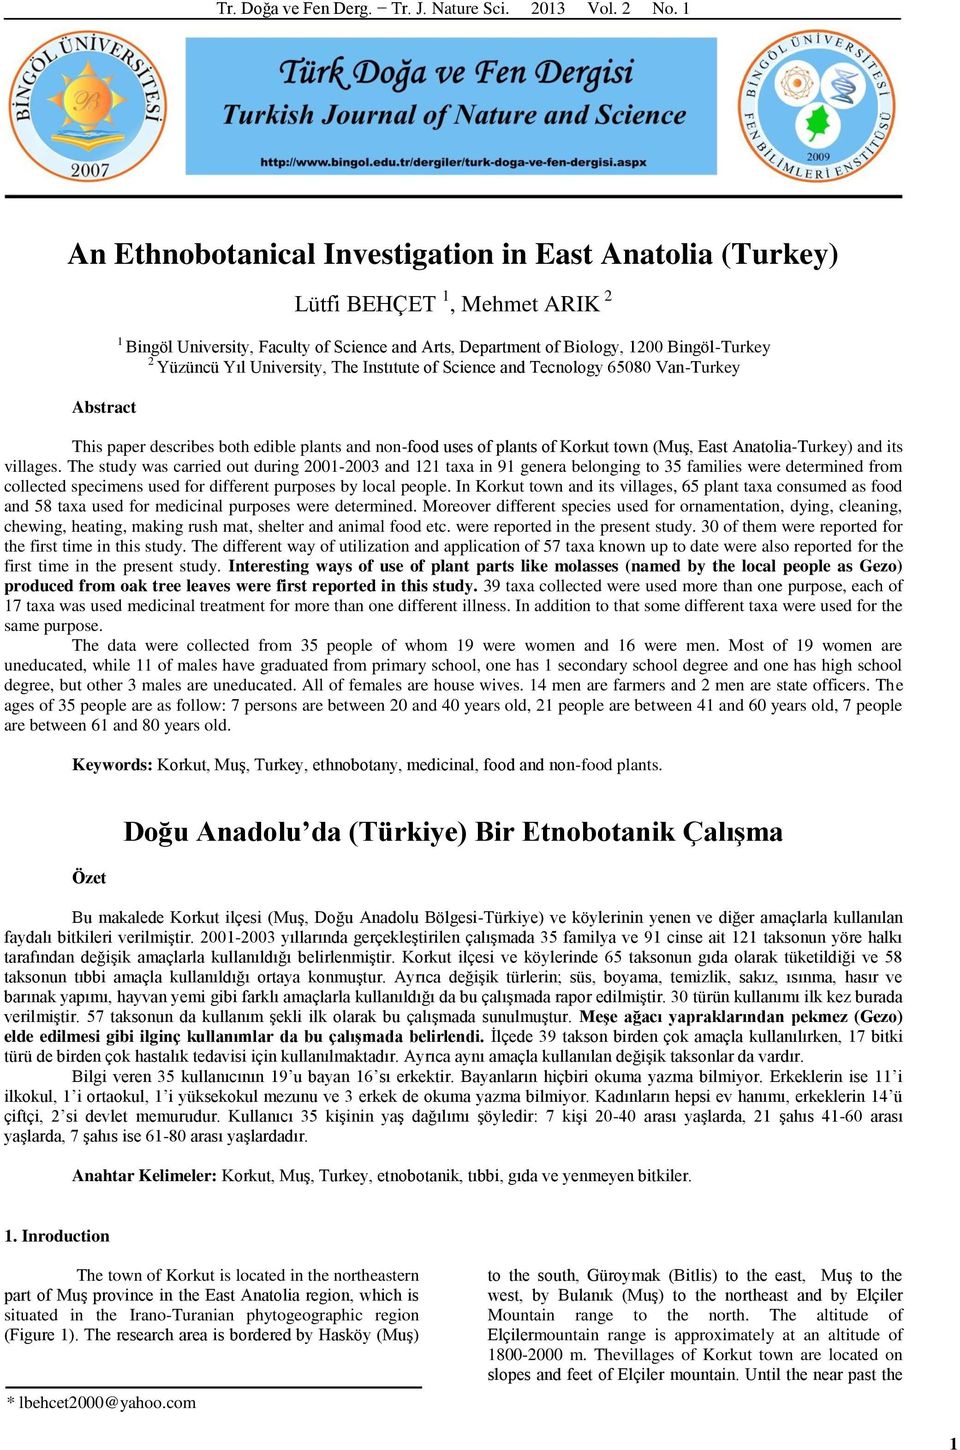 University, The Instıtute of Science and Tecnology 65080 Van-Turkey Abstract This paper describes both edible plants and non-food uses of plants of Korkut town (Muş, East Anatolia-Turkey) and its